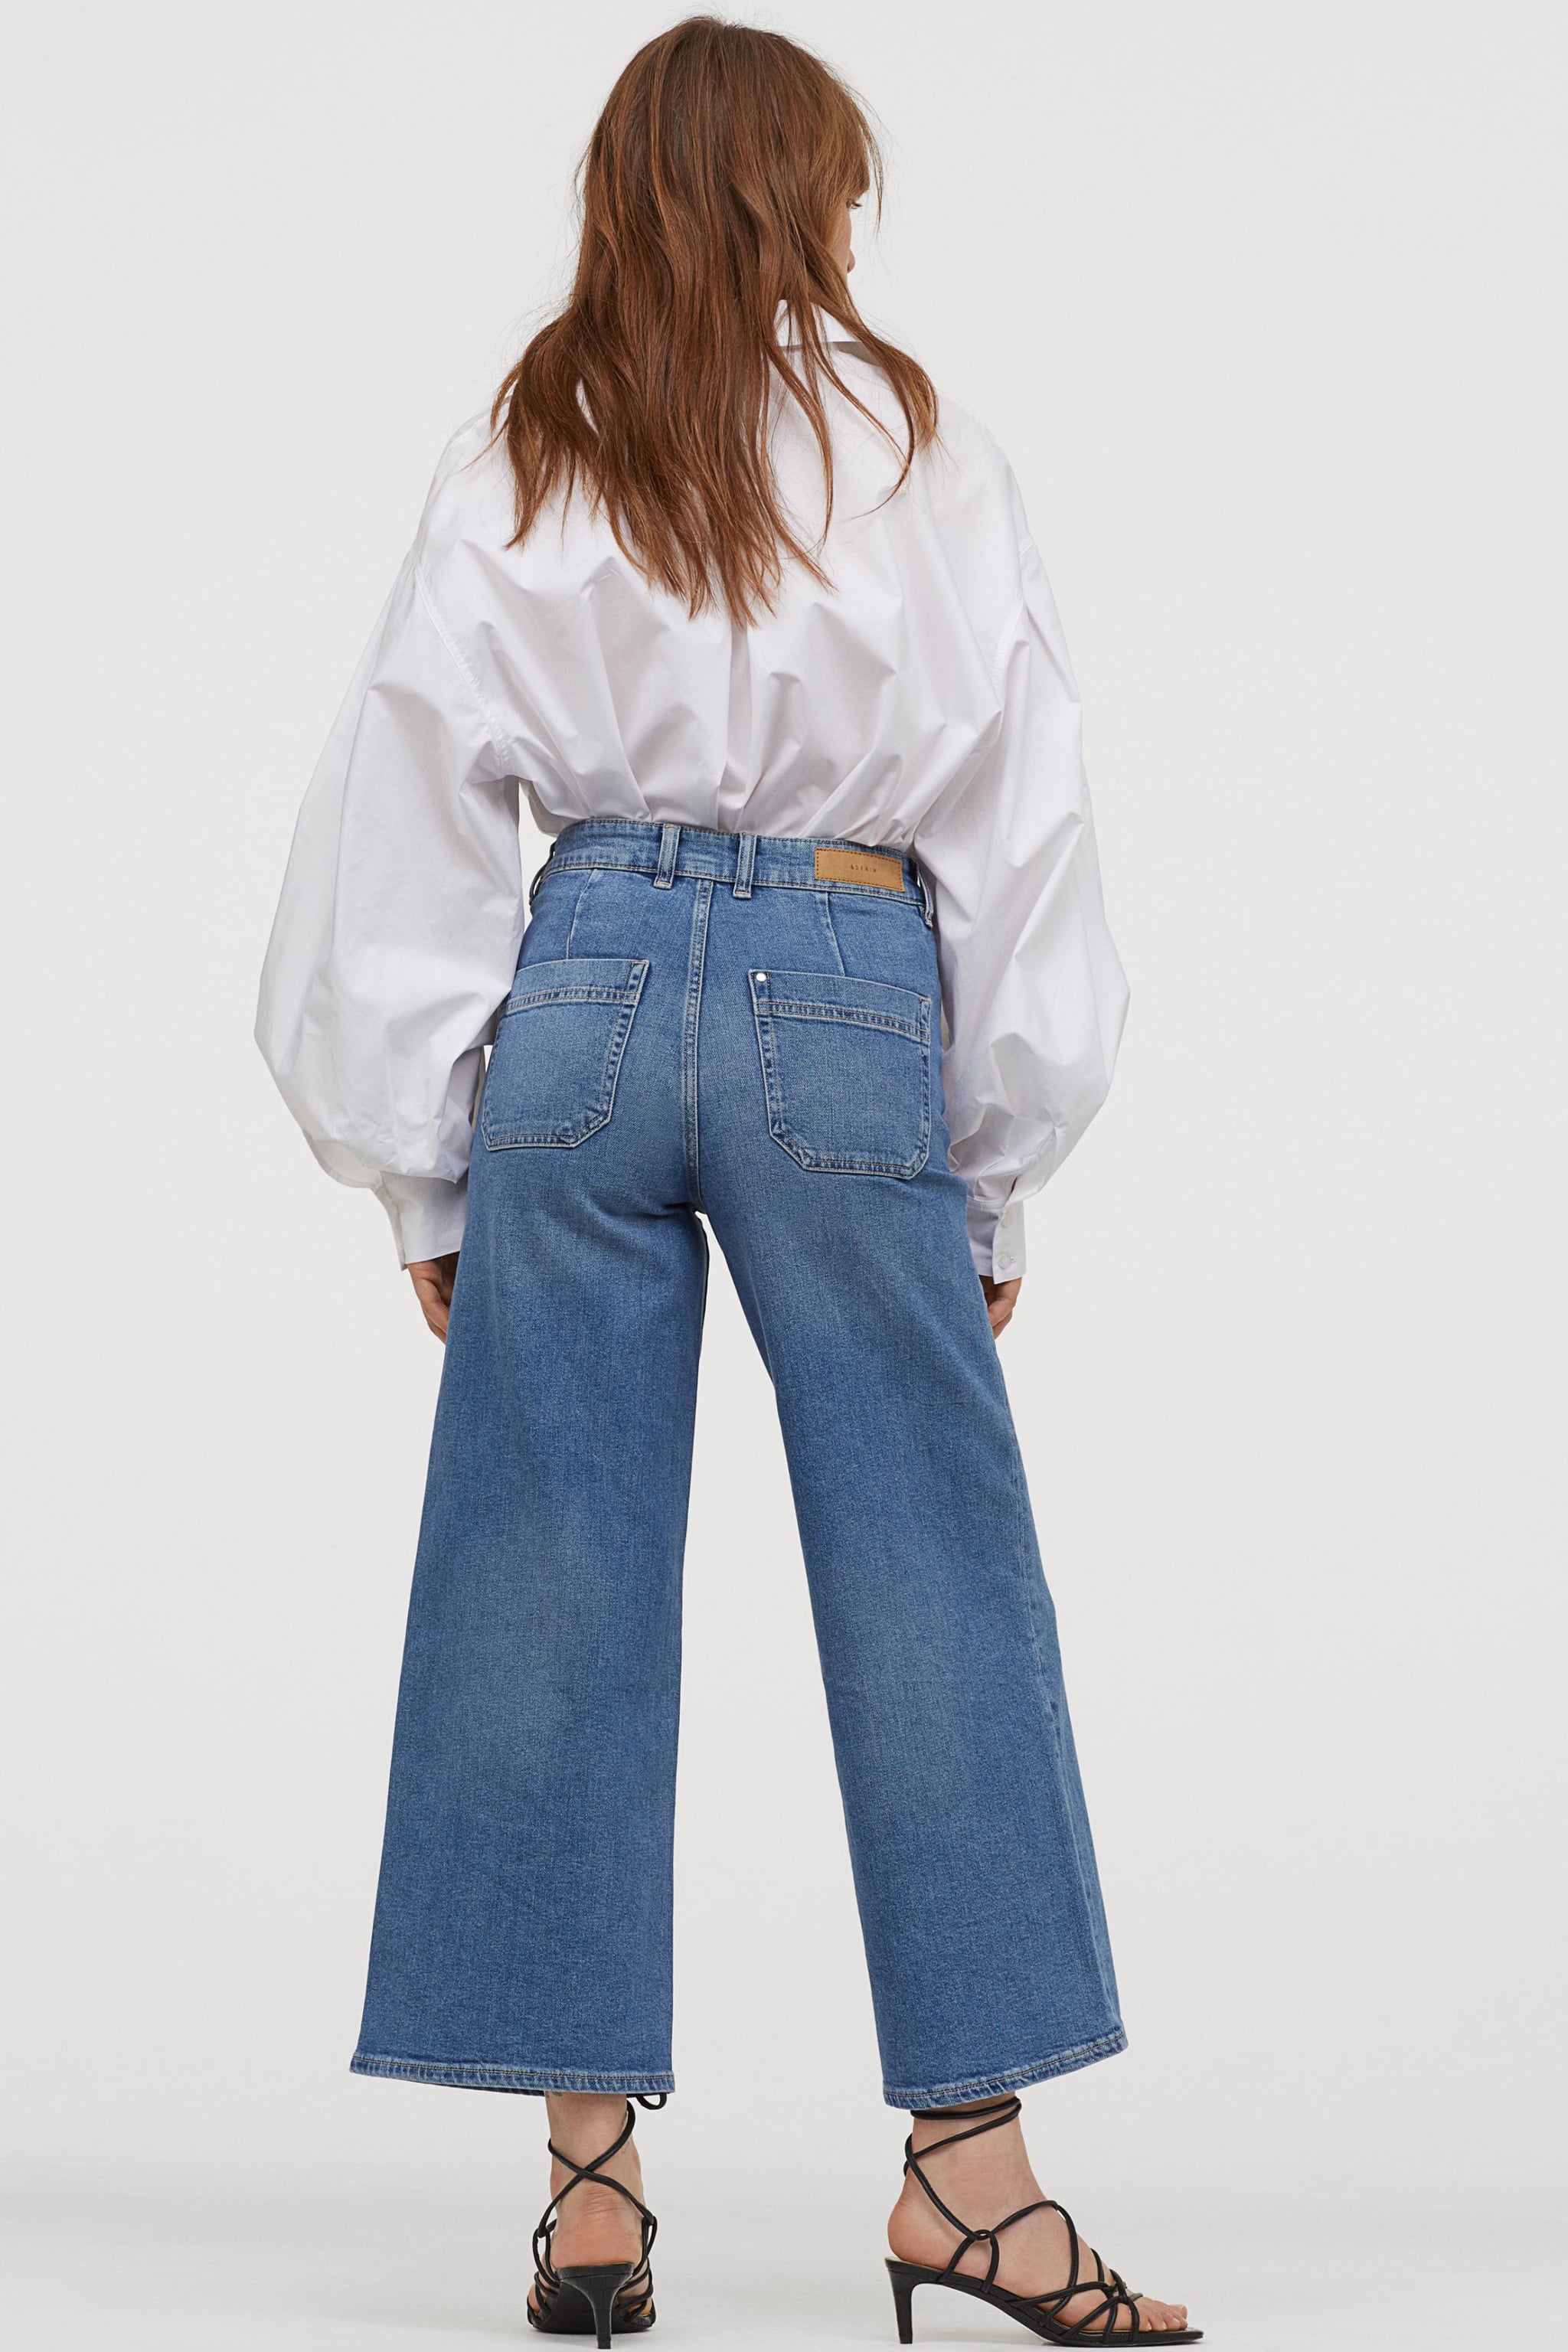 h&m culotte high ankle jeans